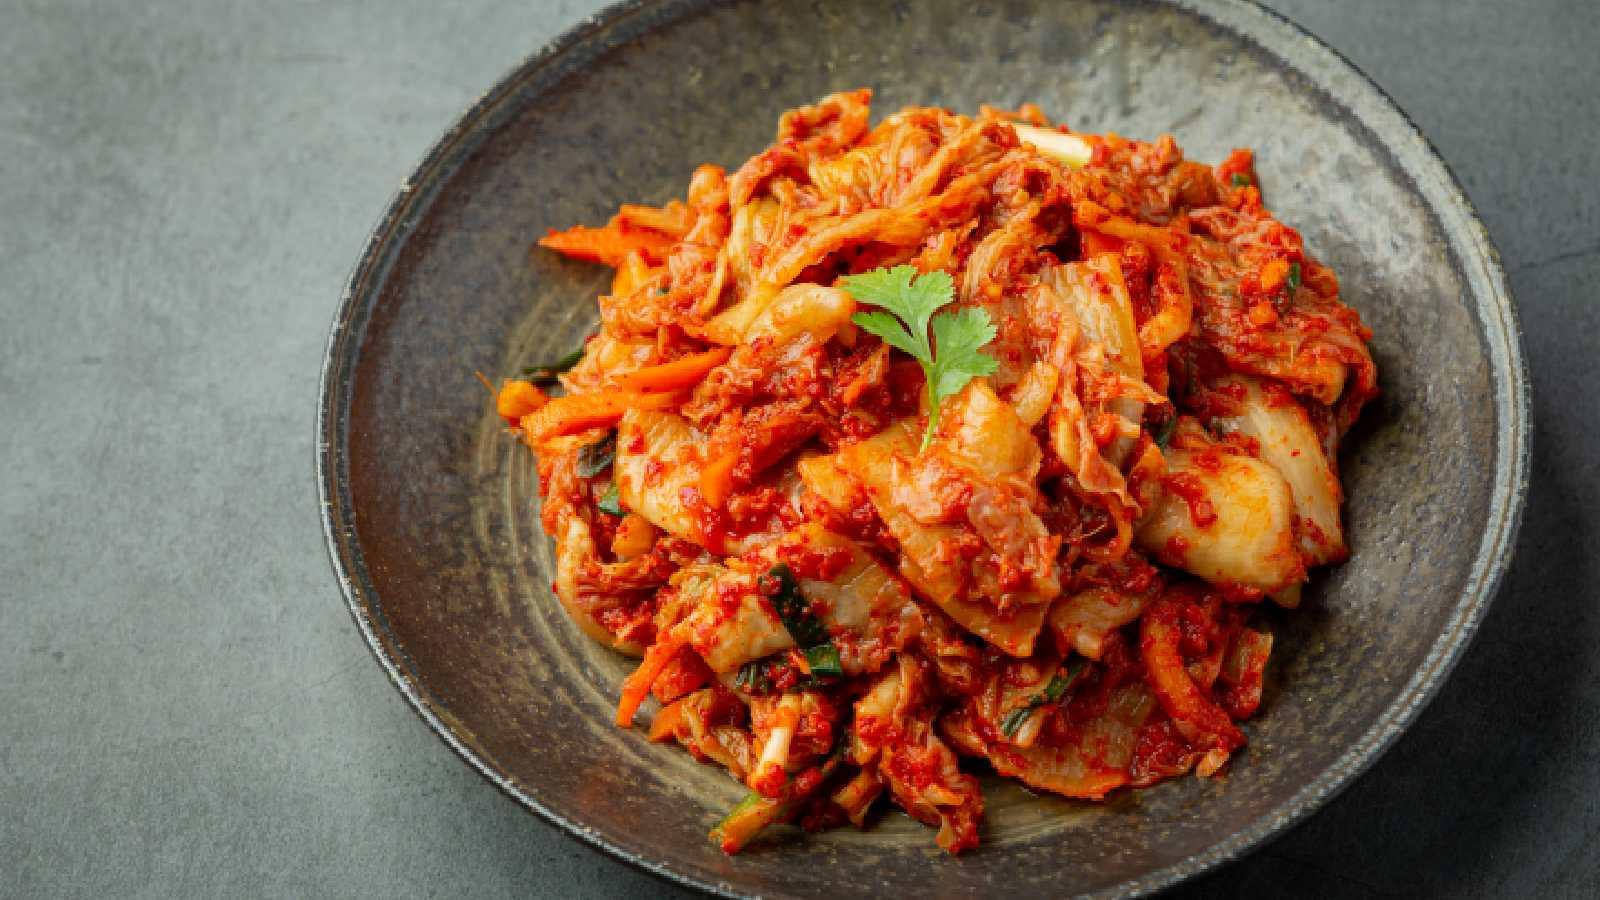 6 Reasons why Kimchi is a beauty food